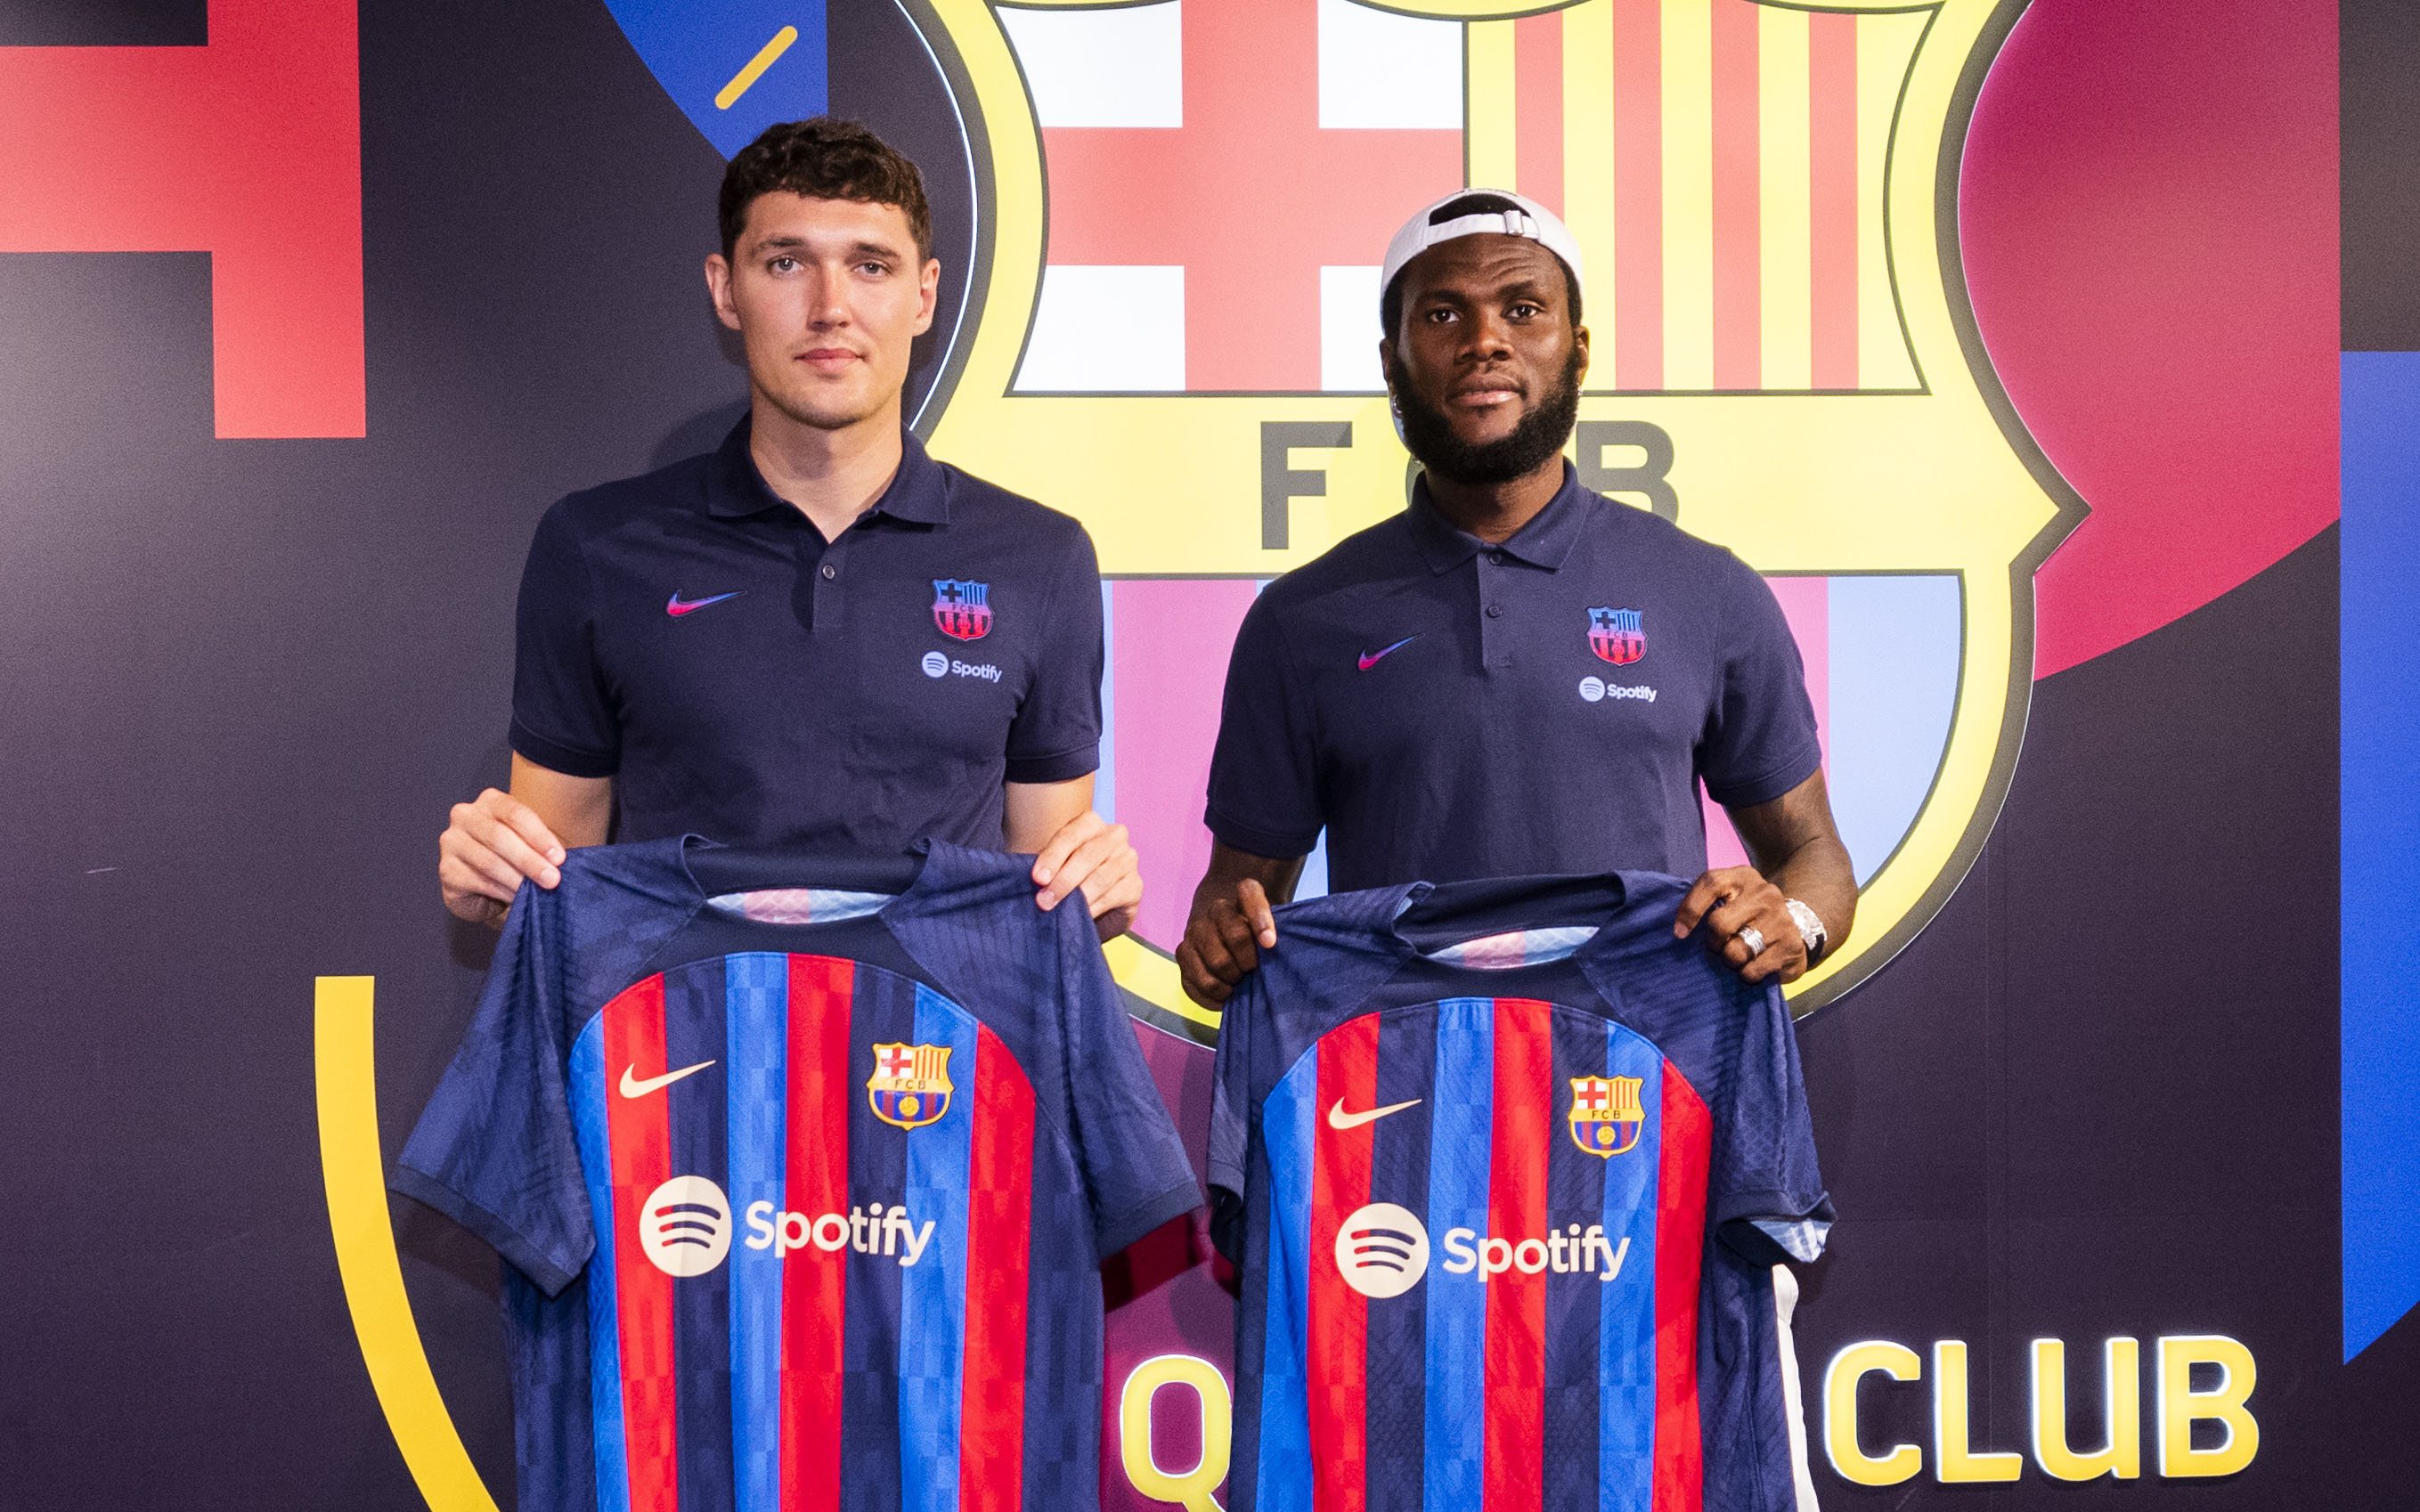 Kessie and Christensen visit FC Barcelona Museum and Store